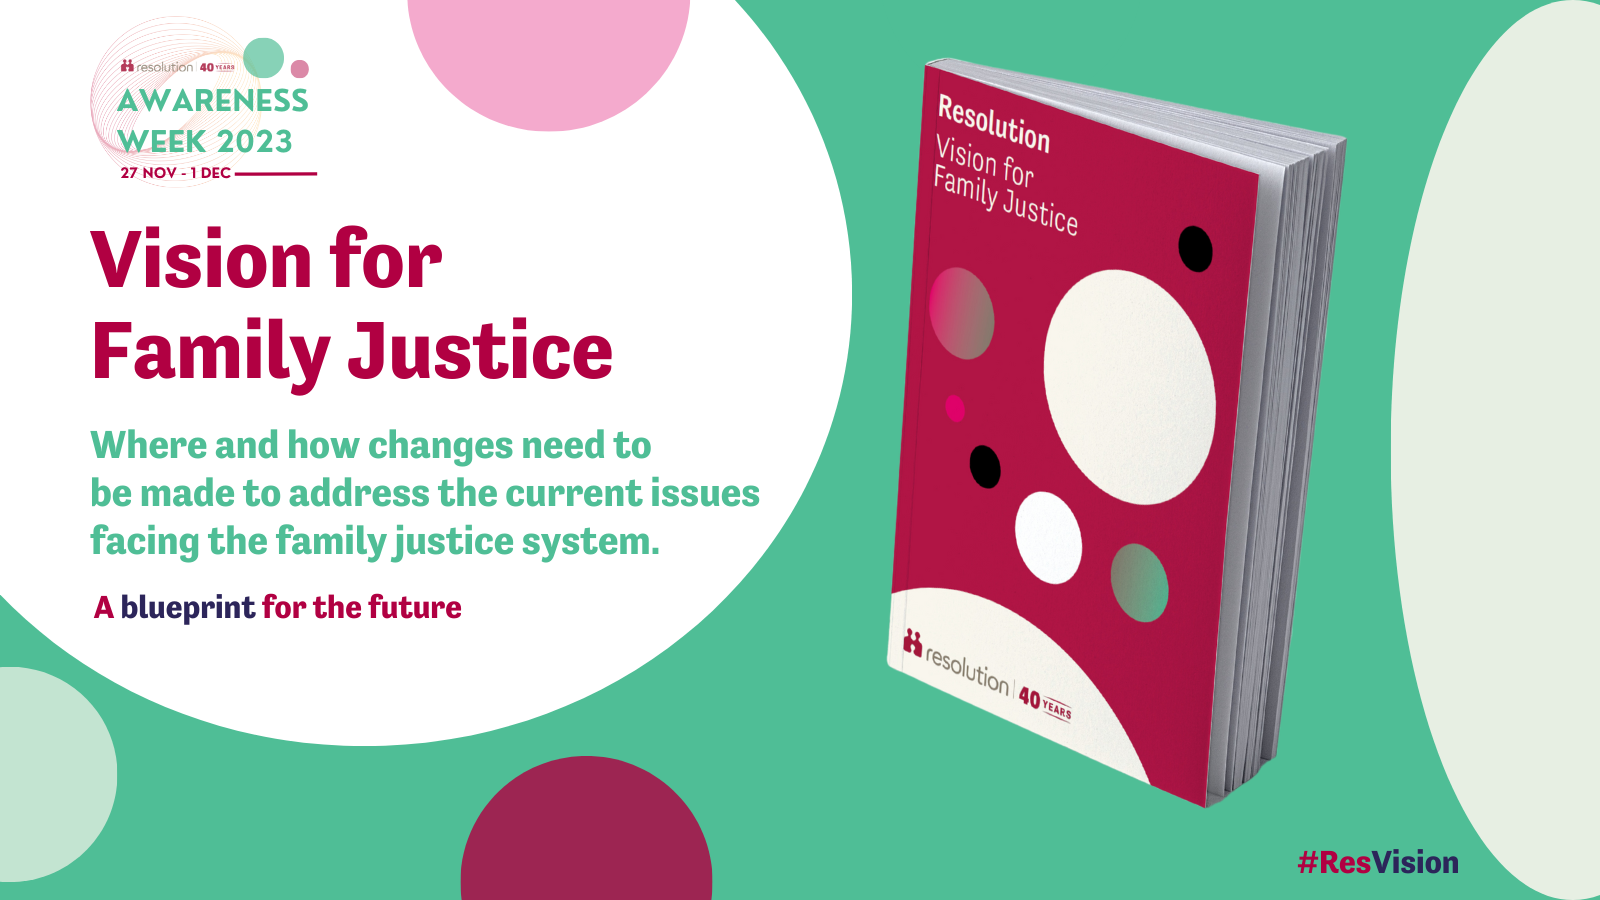 Resolution launches its Vision for Family Justice